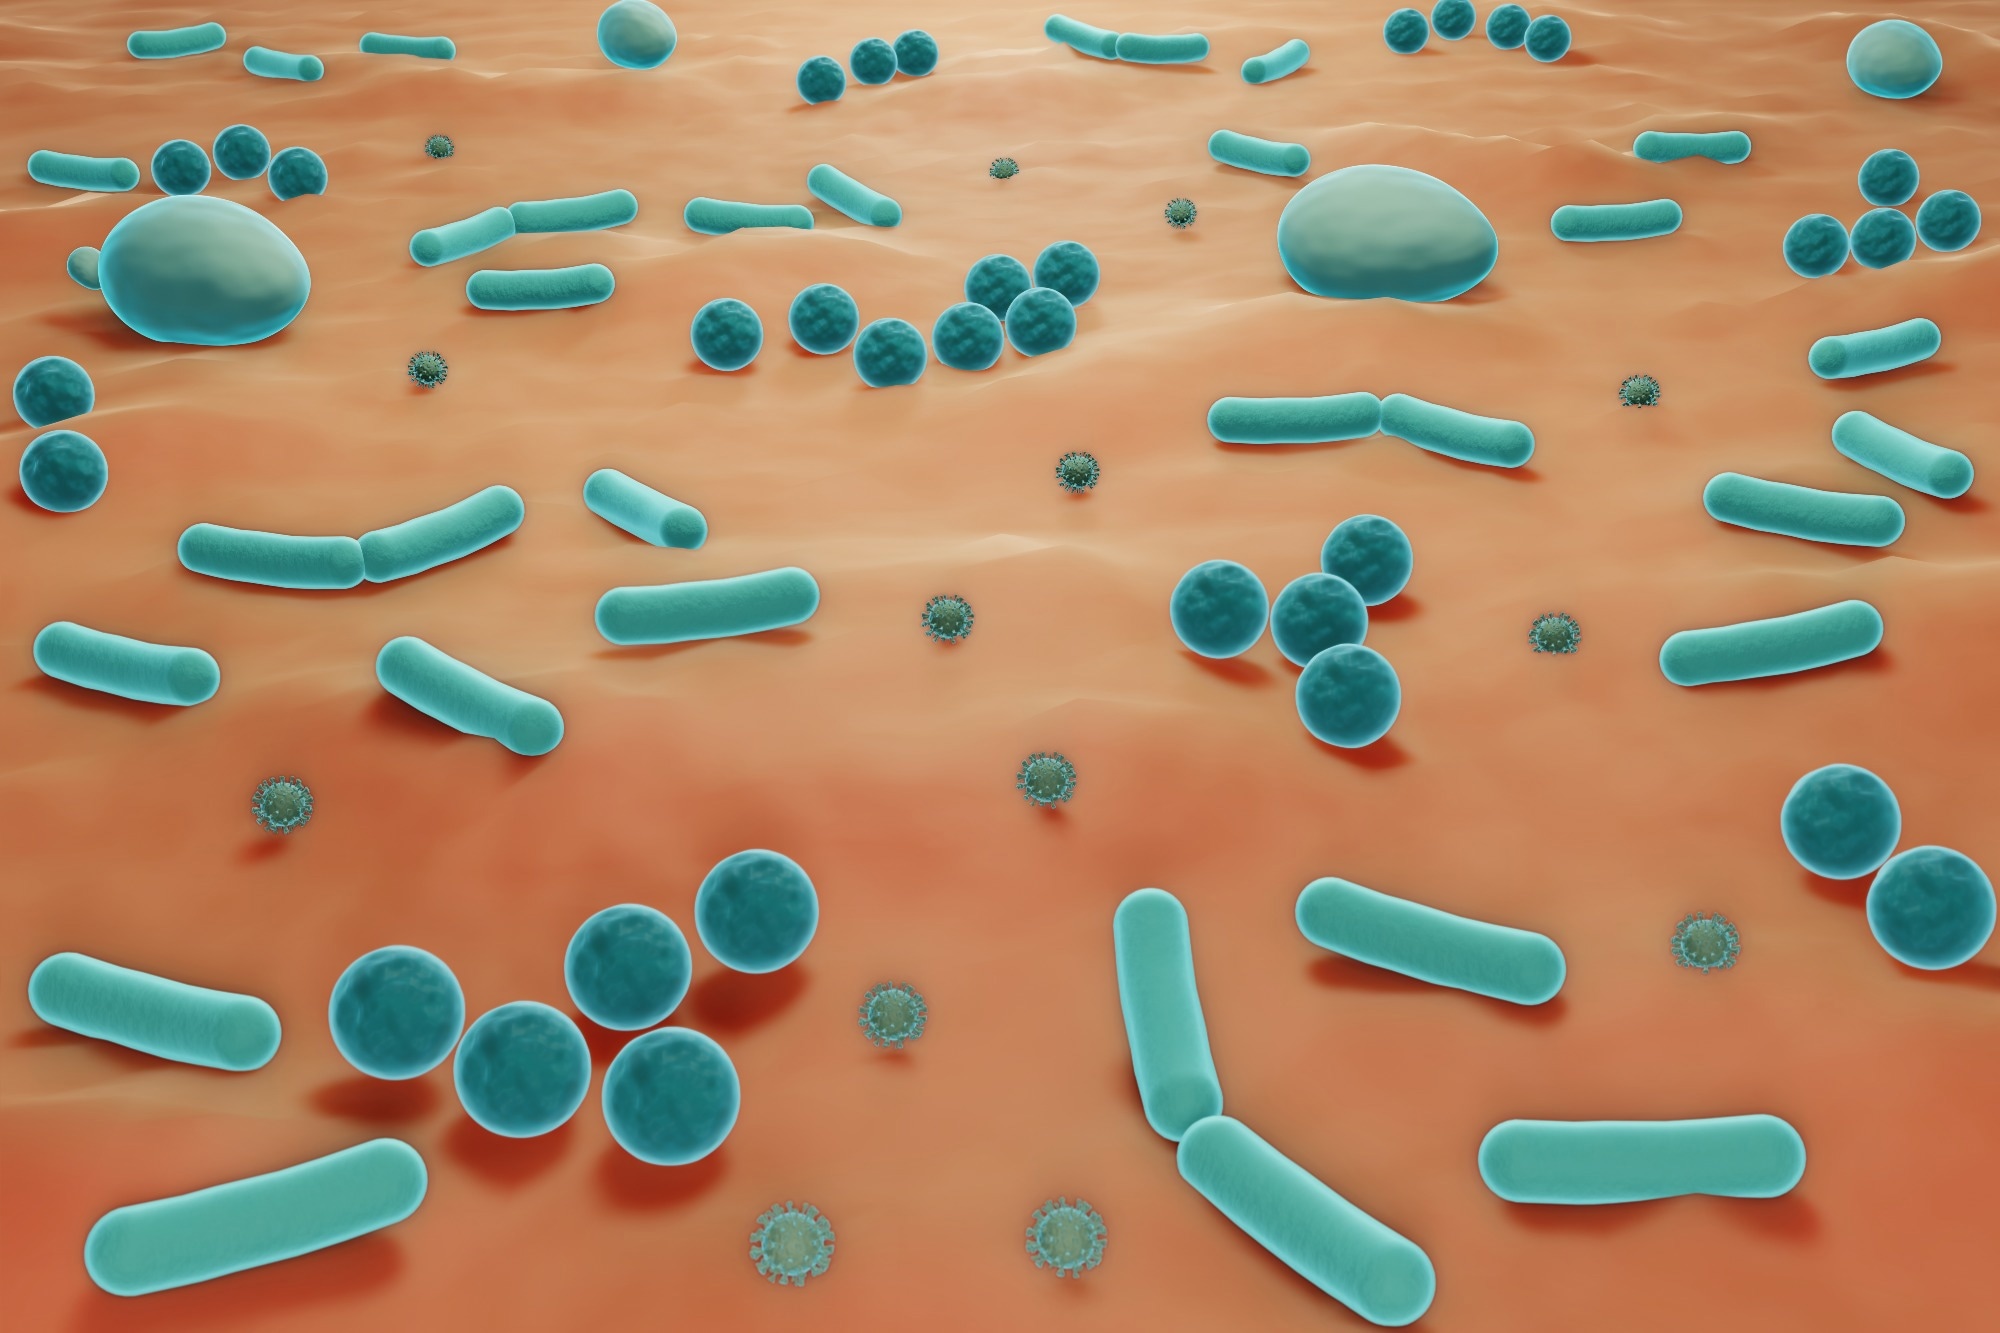 Study: Skin microbiome bacteria enriched following long sun exposure can reduce oxidative damage: a 5-month preliminary study of ten lifeguards. Image Credit: ART-ur/Shutterstock.com